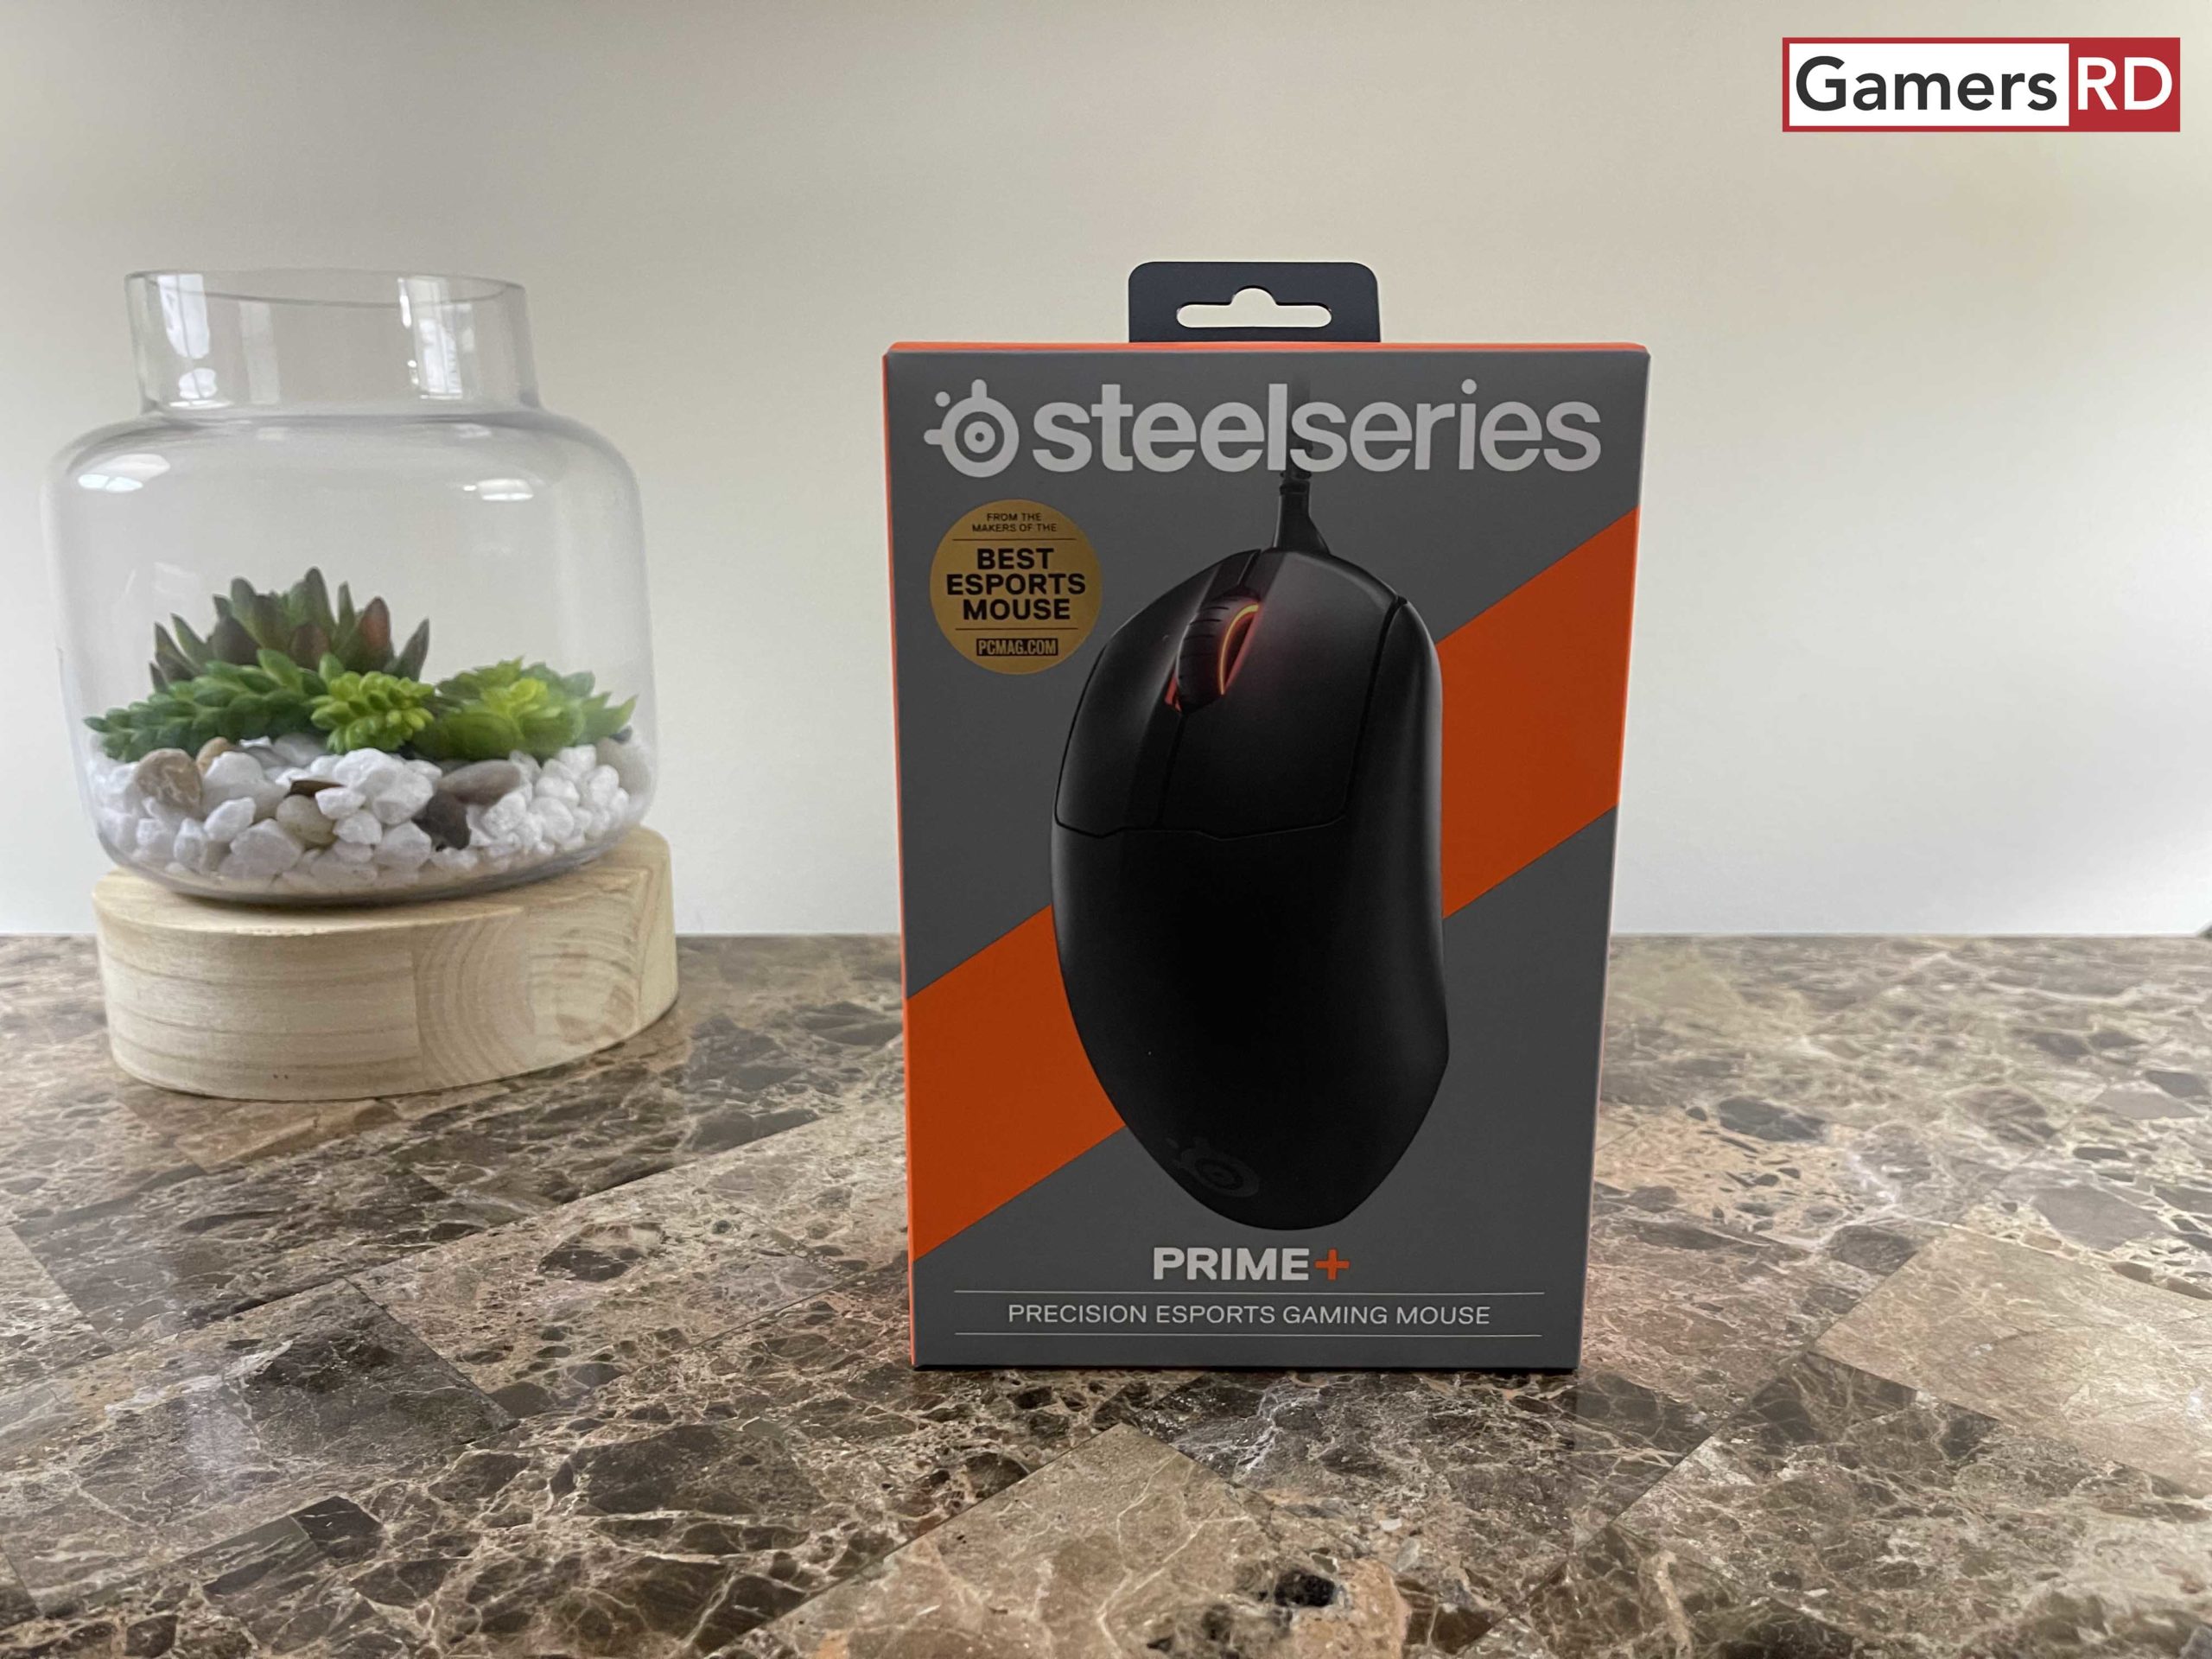 SteelSeries Prime + Gaming Mouse Review